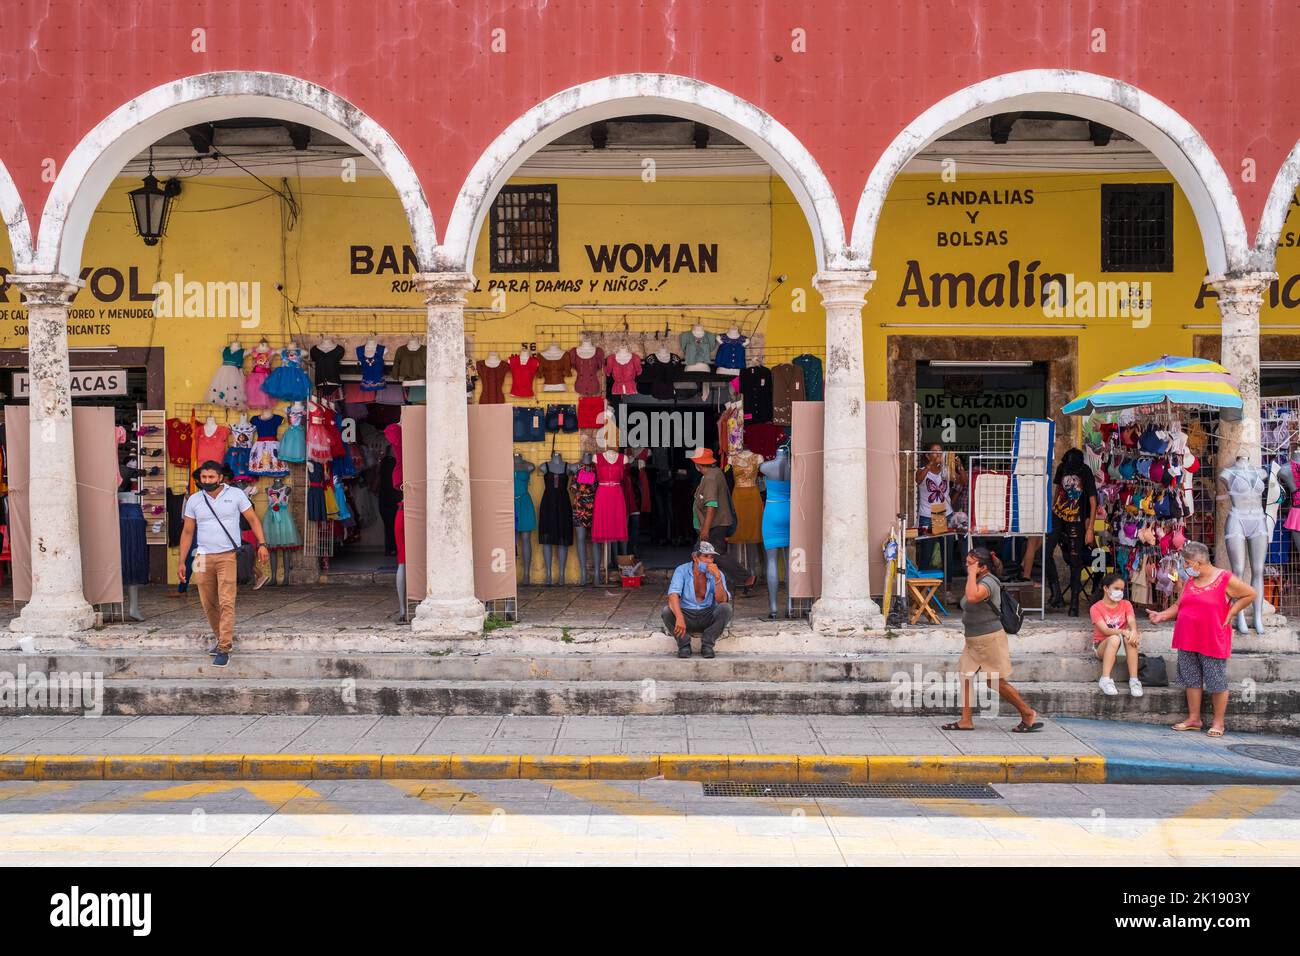 Street market selling clothes and traditional products in Merida, Mexico Stock Photo